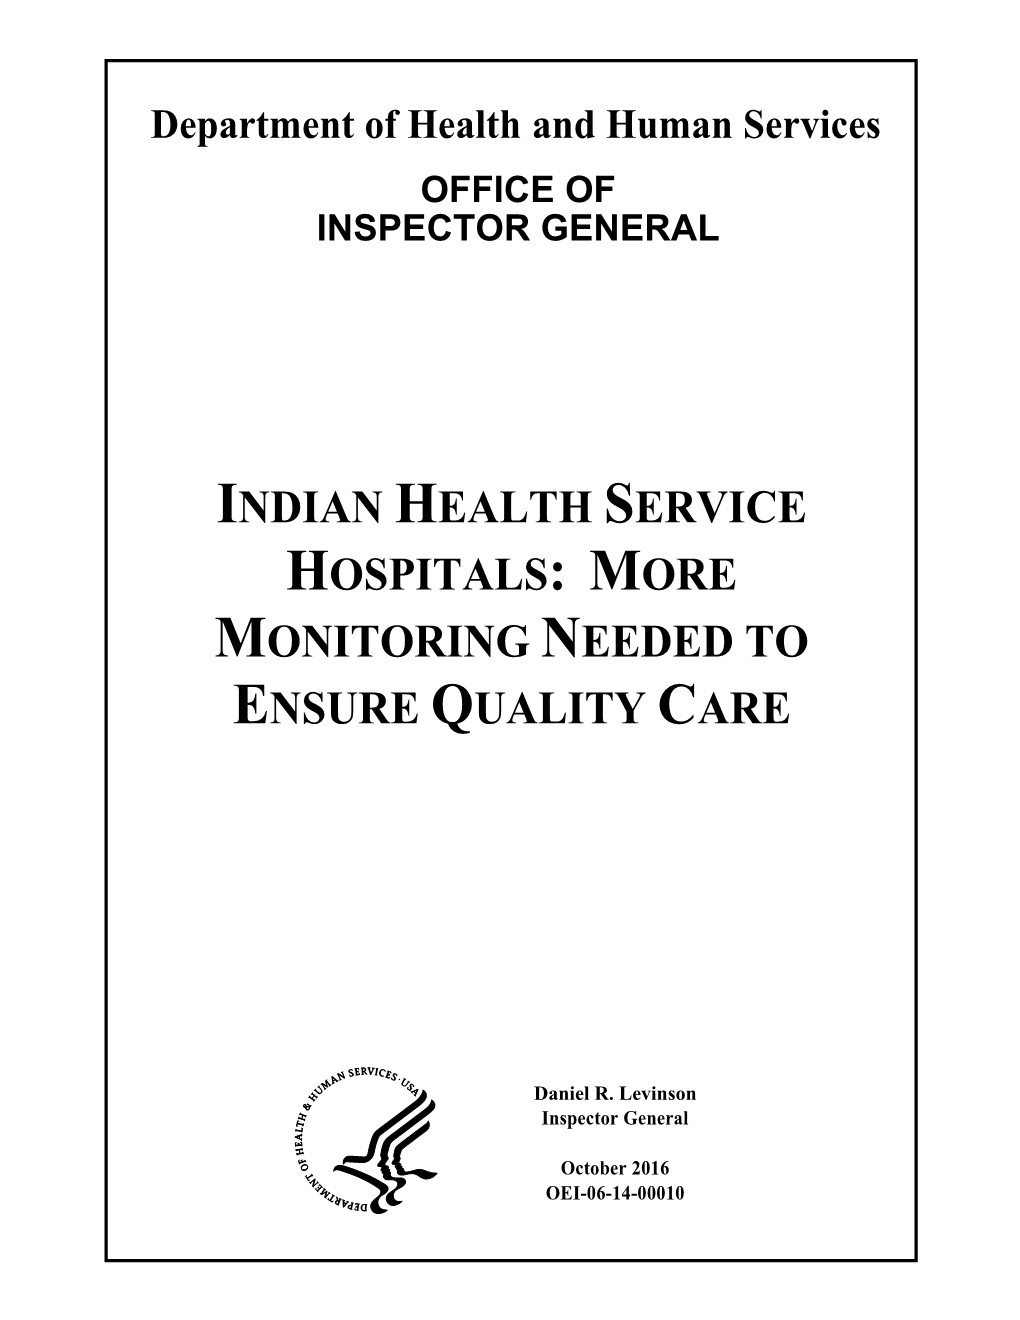 Indian Health Service Hospitals: More Monitoring Needed to Ensure Quality Care Oei-06-14-00010